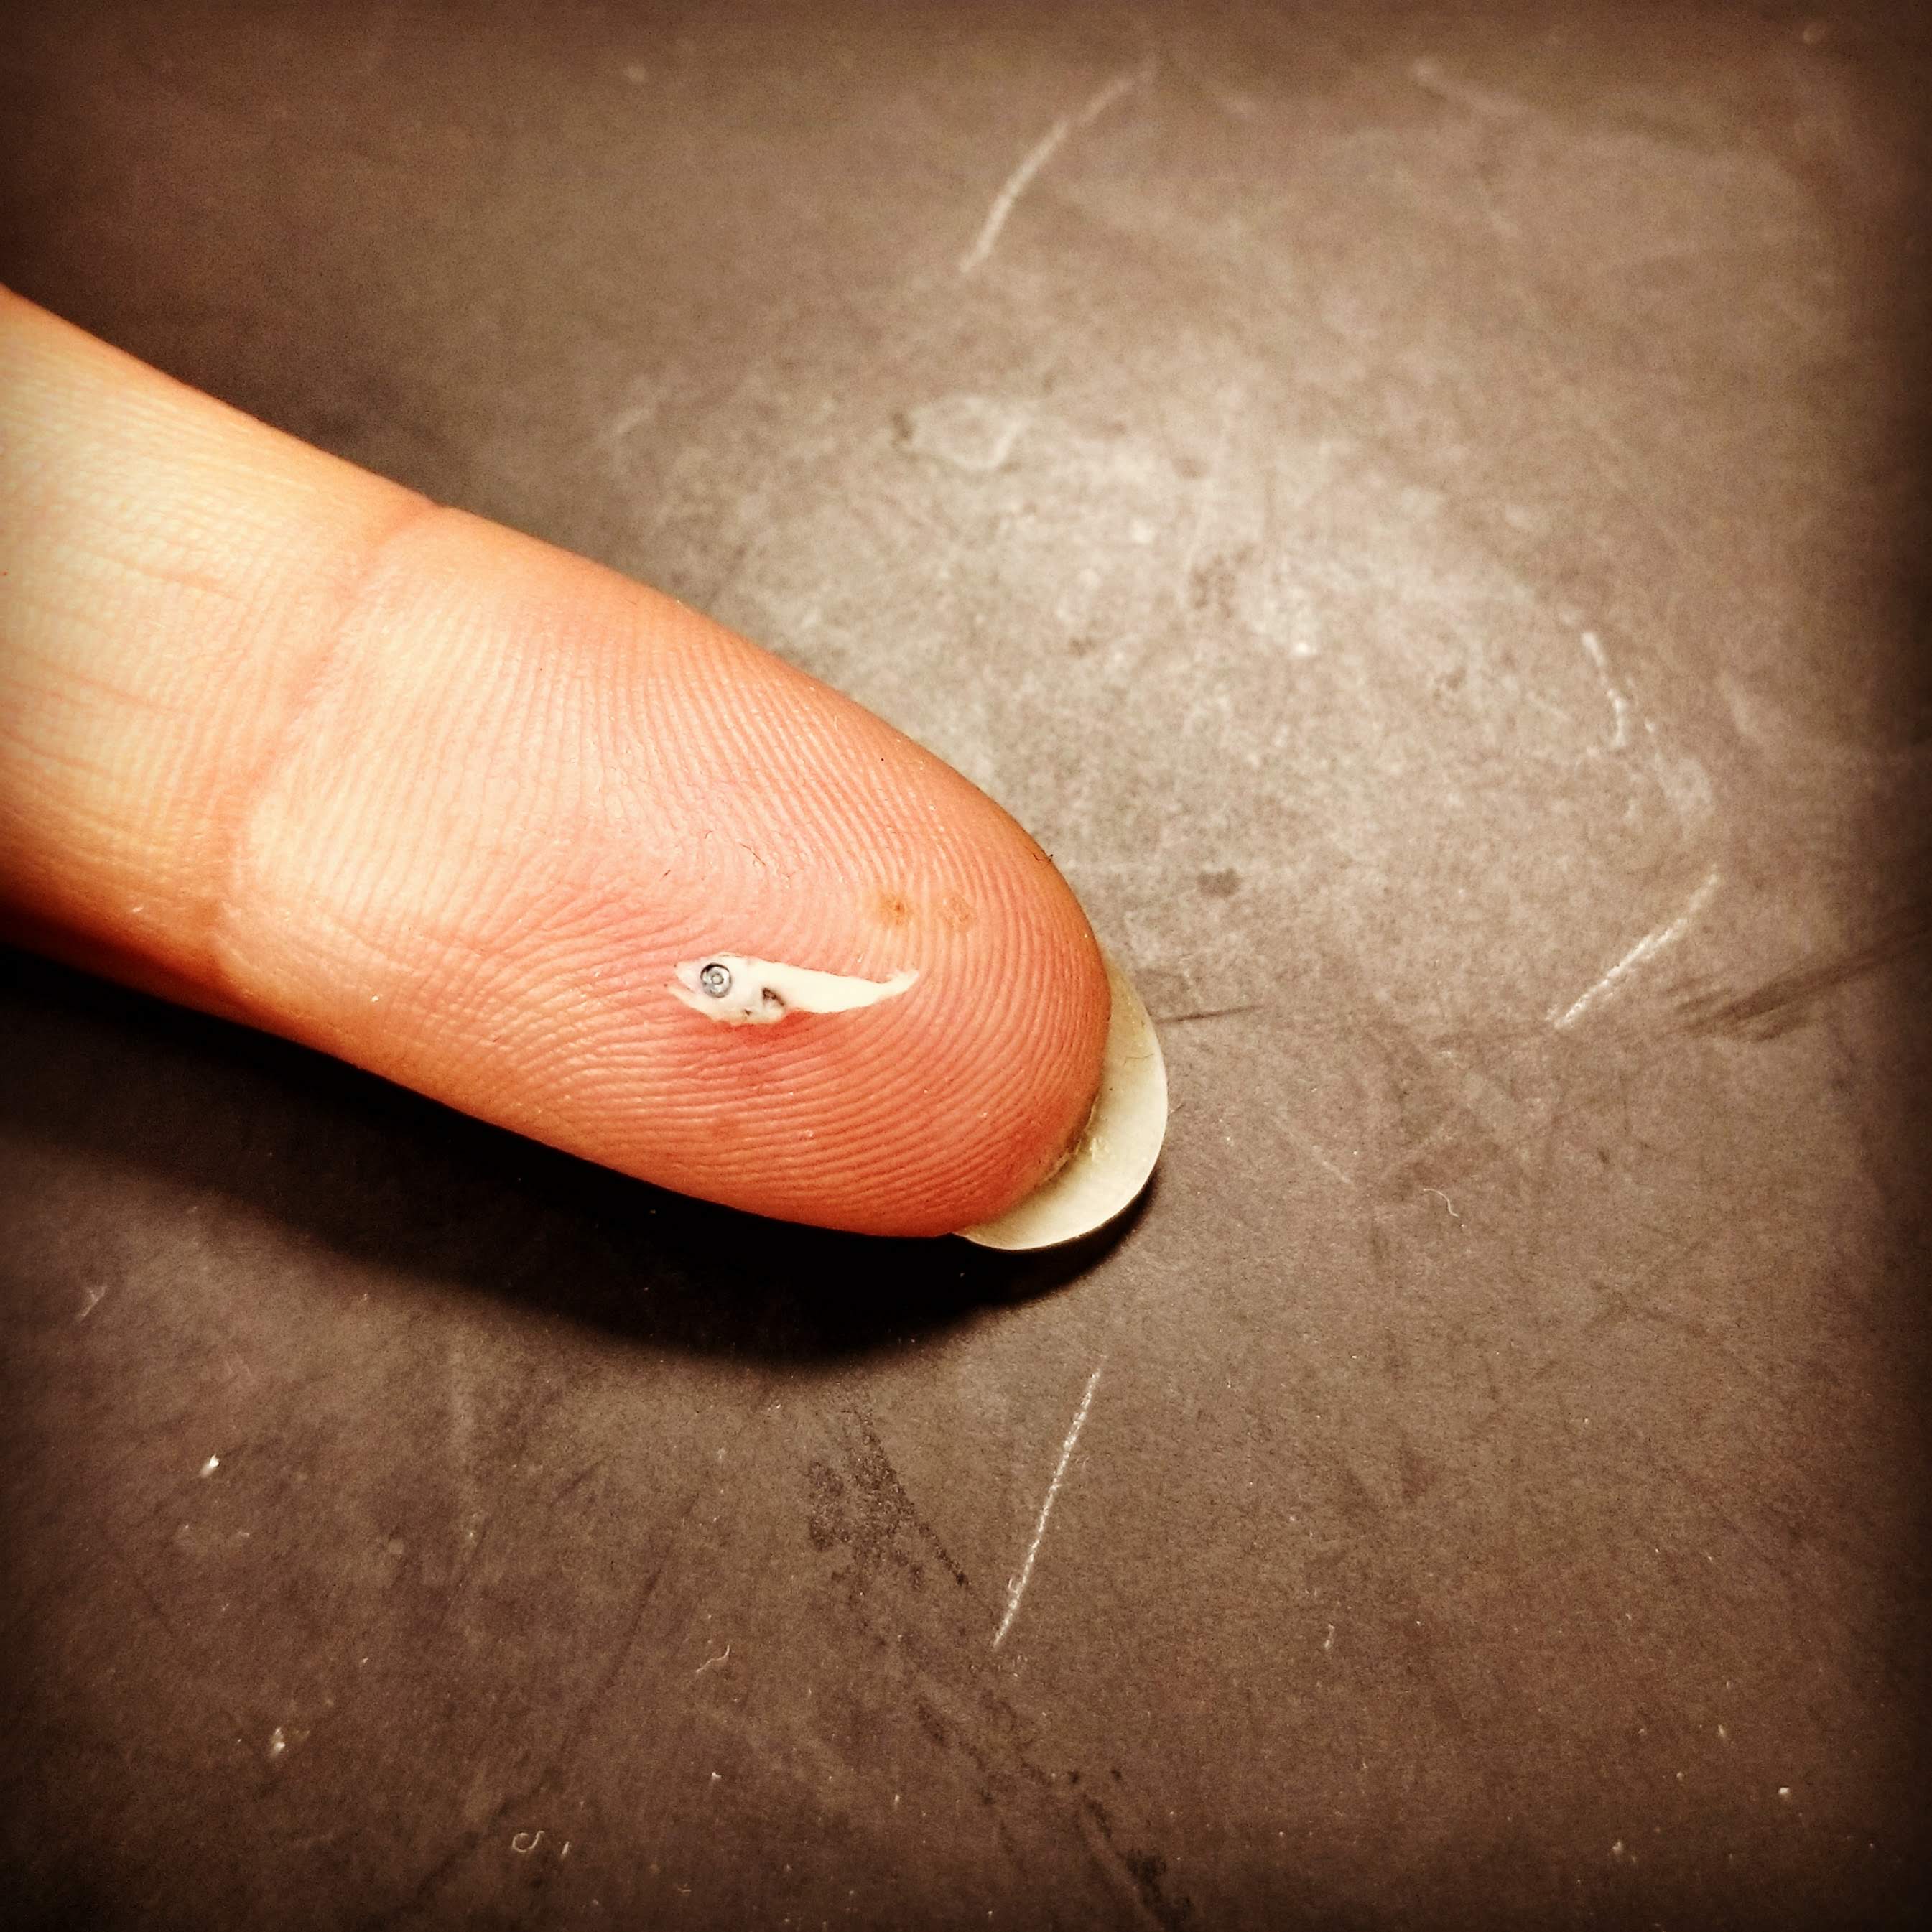 Bluefin tuna larvae, photographed on the tip of Chrissy’s finger.